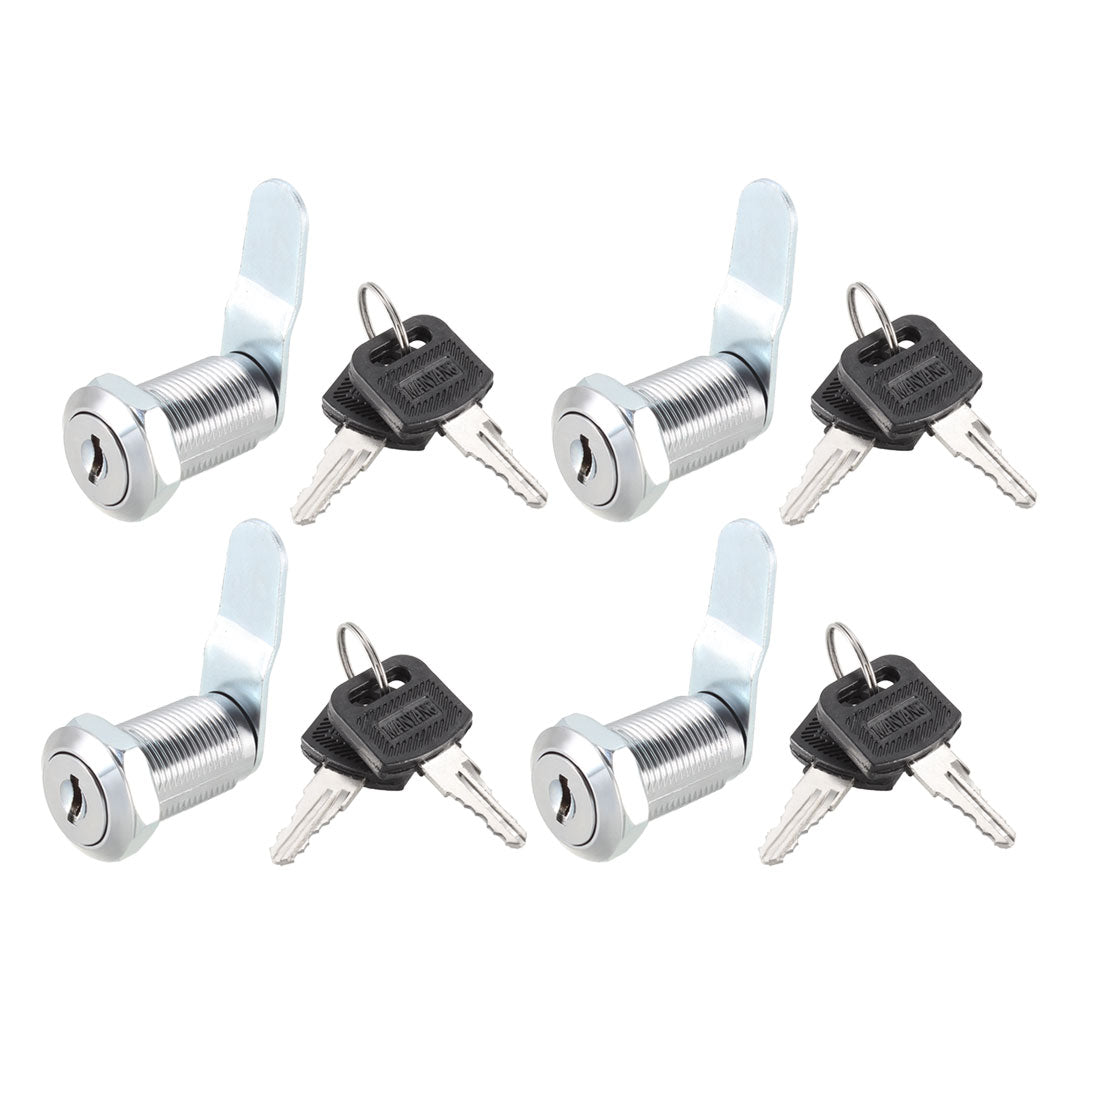 uxcell Uxcell Cam Lock 25mm Cylinder Length Fit on Max 5/8-inch Panel Keyed Different 4Pcs